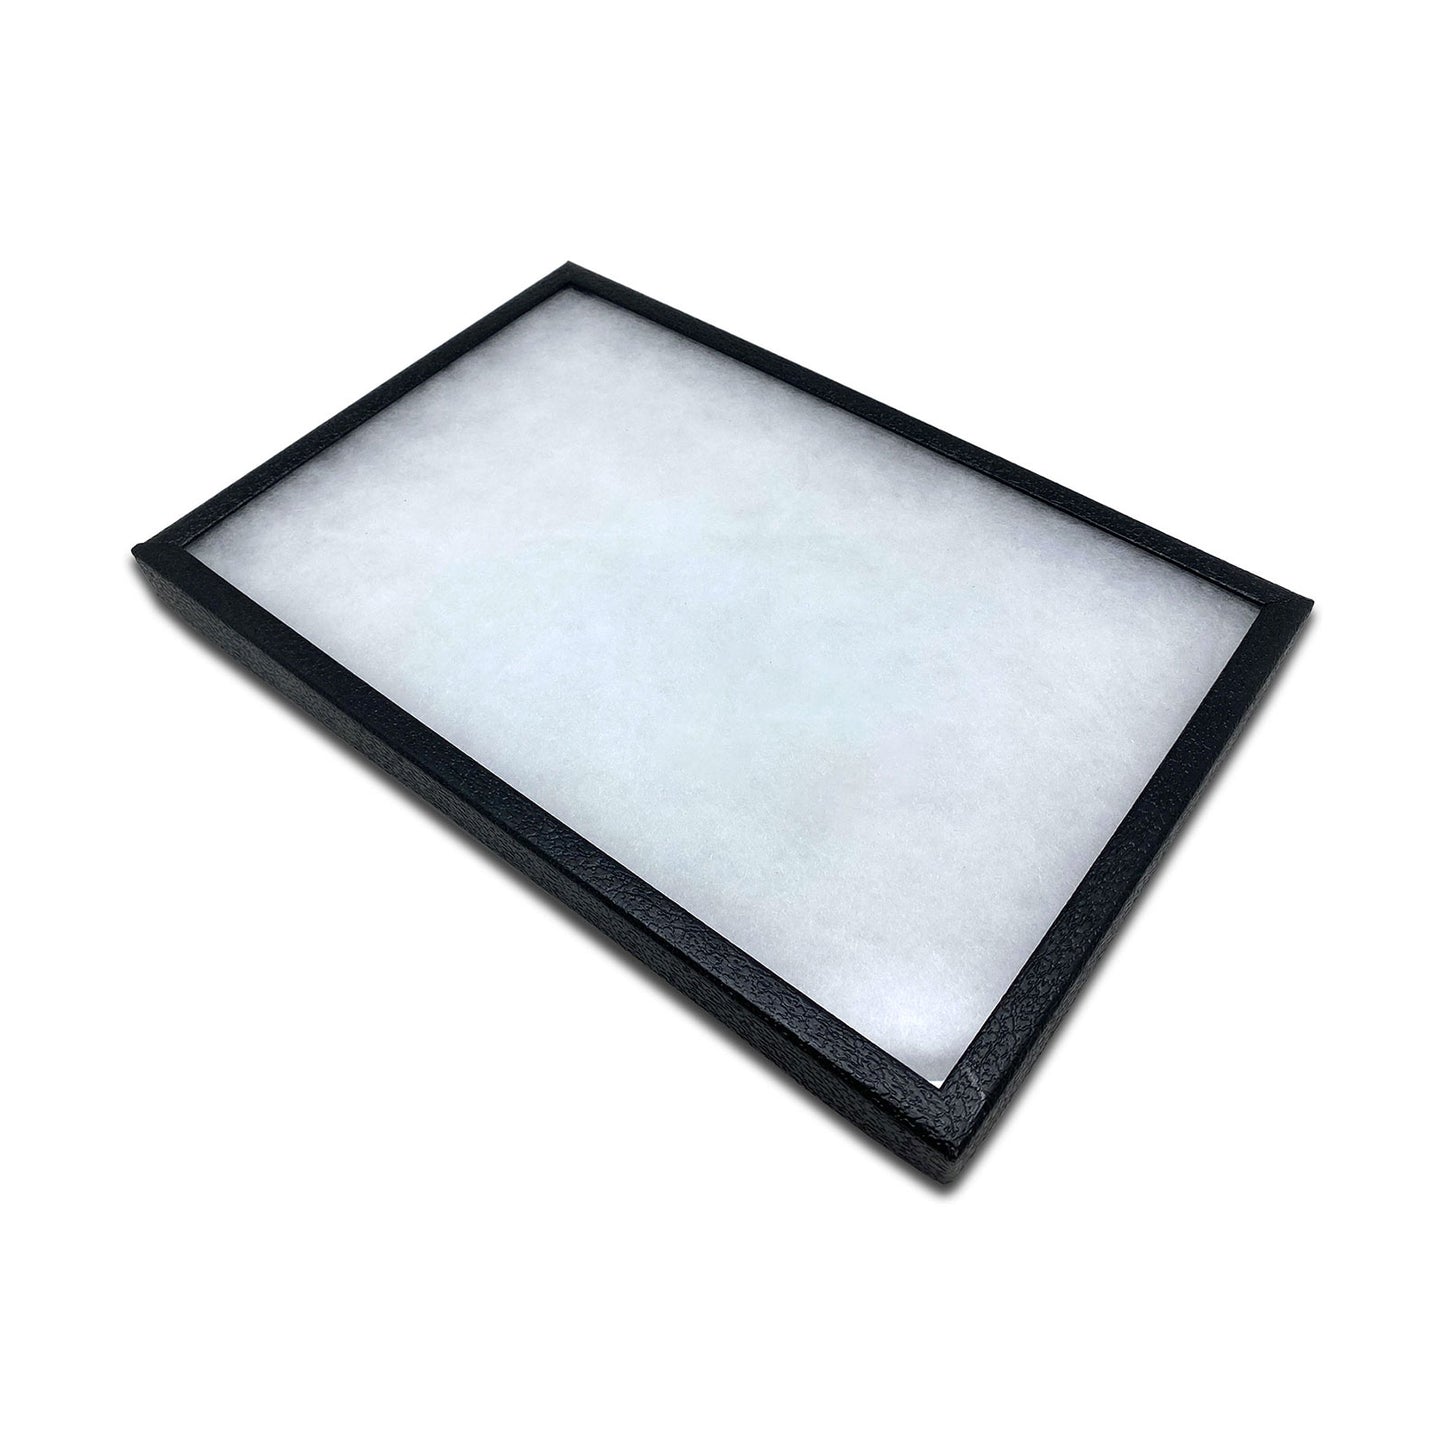 12 1/4" x 8 1/4" Black Glass Top Gem Tray with Poly-Fill Wadding